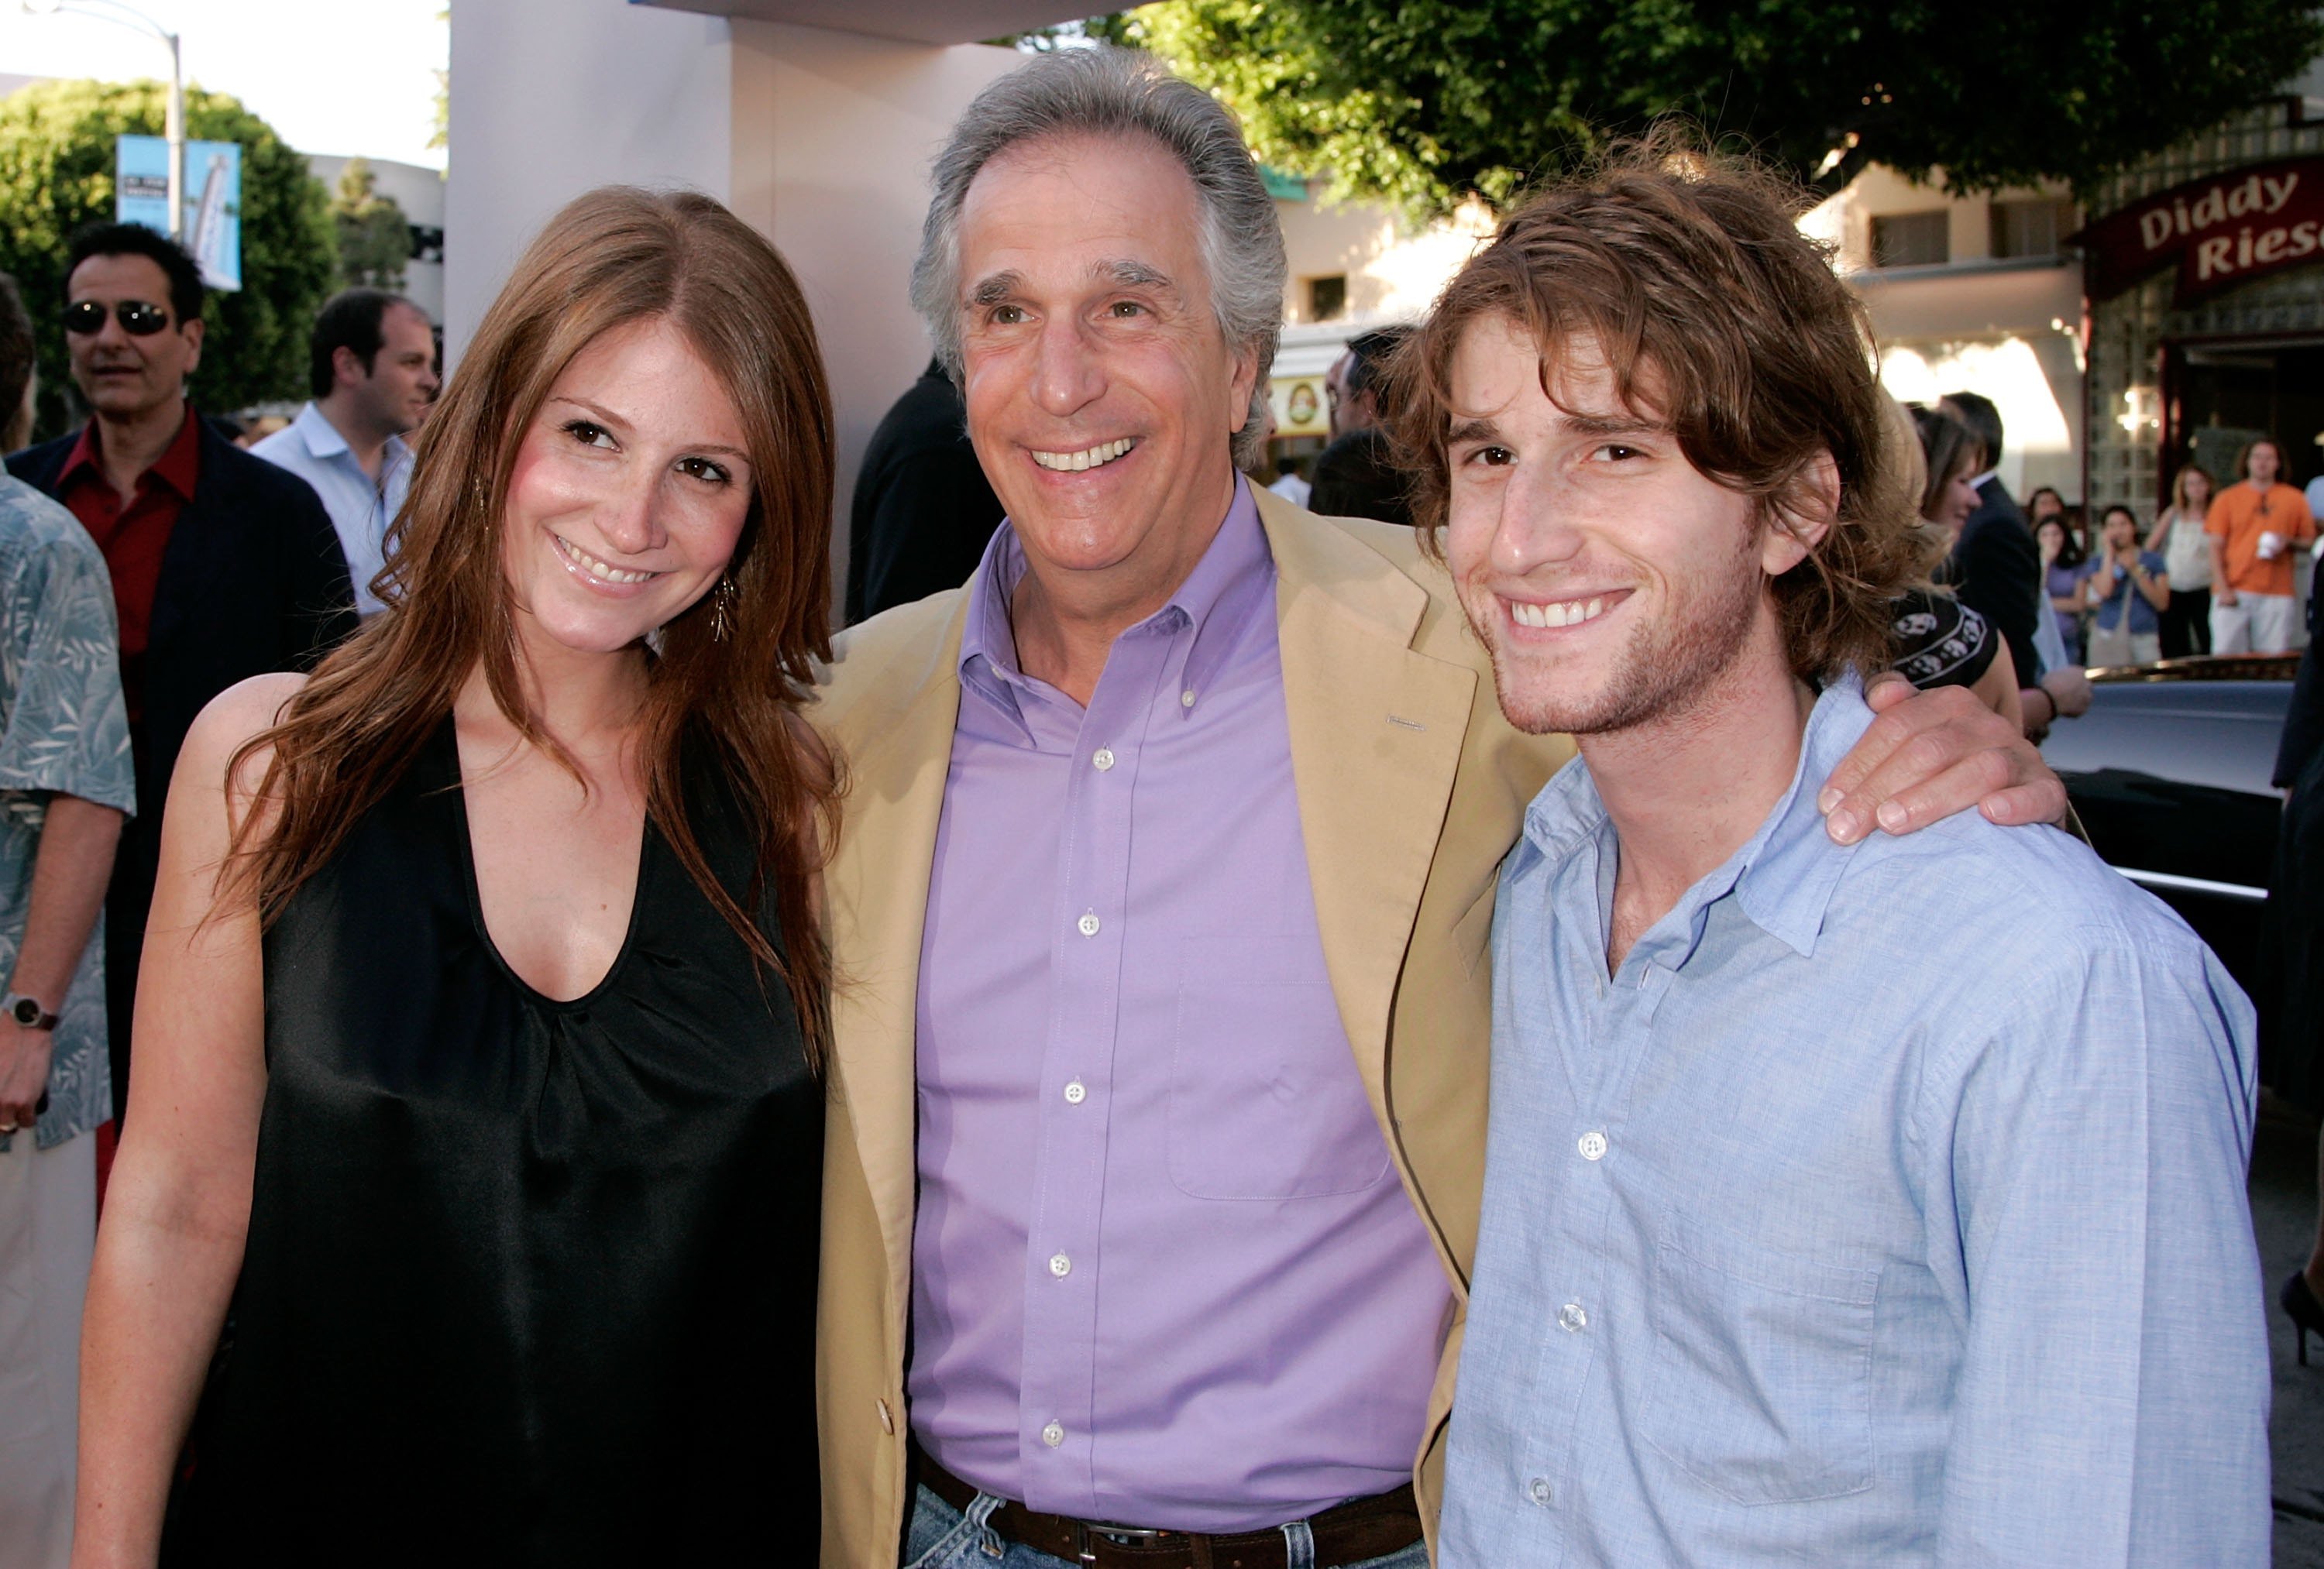 Henry Winkler with son Max Winkler and daughter Zoe Emily Winkler arrive at Sony Pictures premiere of "Click" at the Mann Village Theater on June 14, 2006 in Westwood, California | Photo: Getty Images